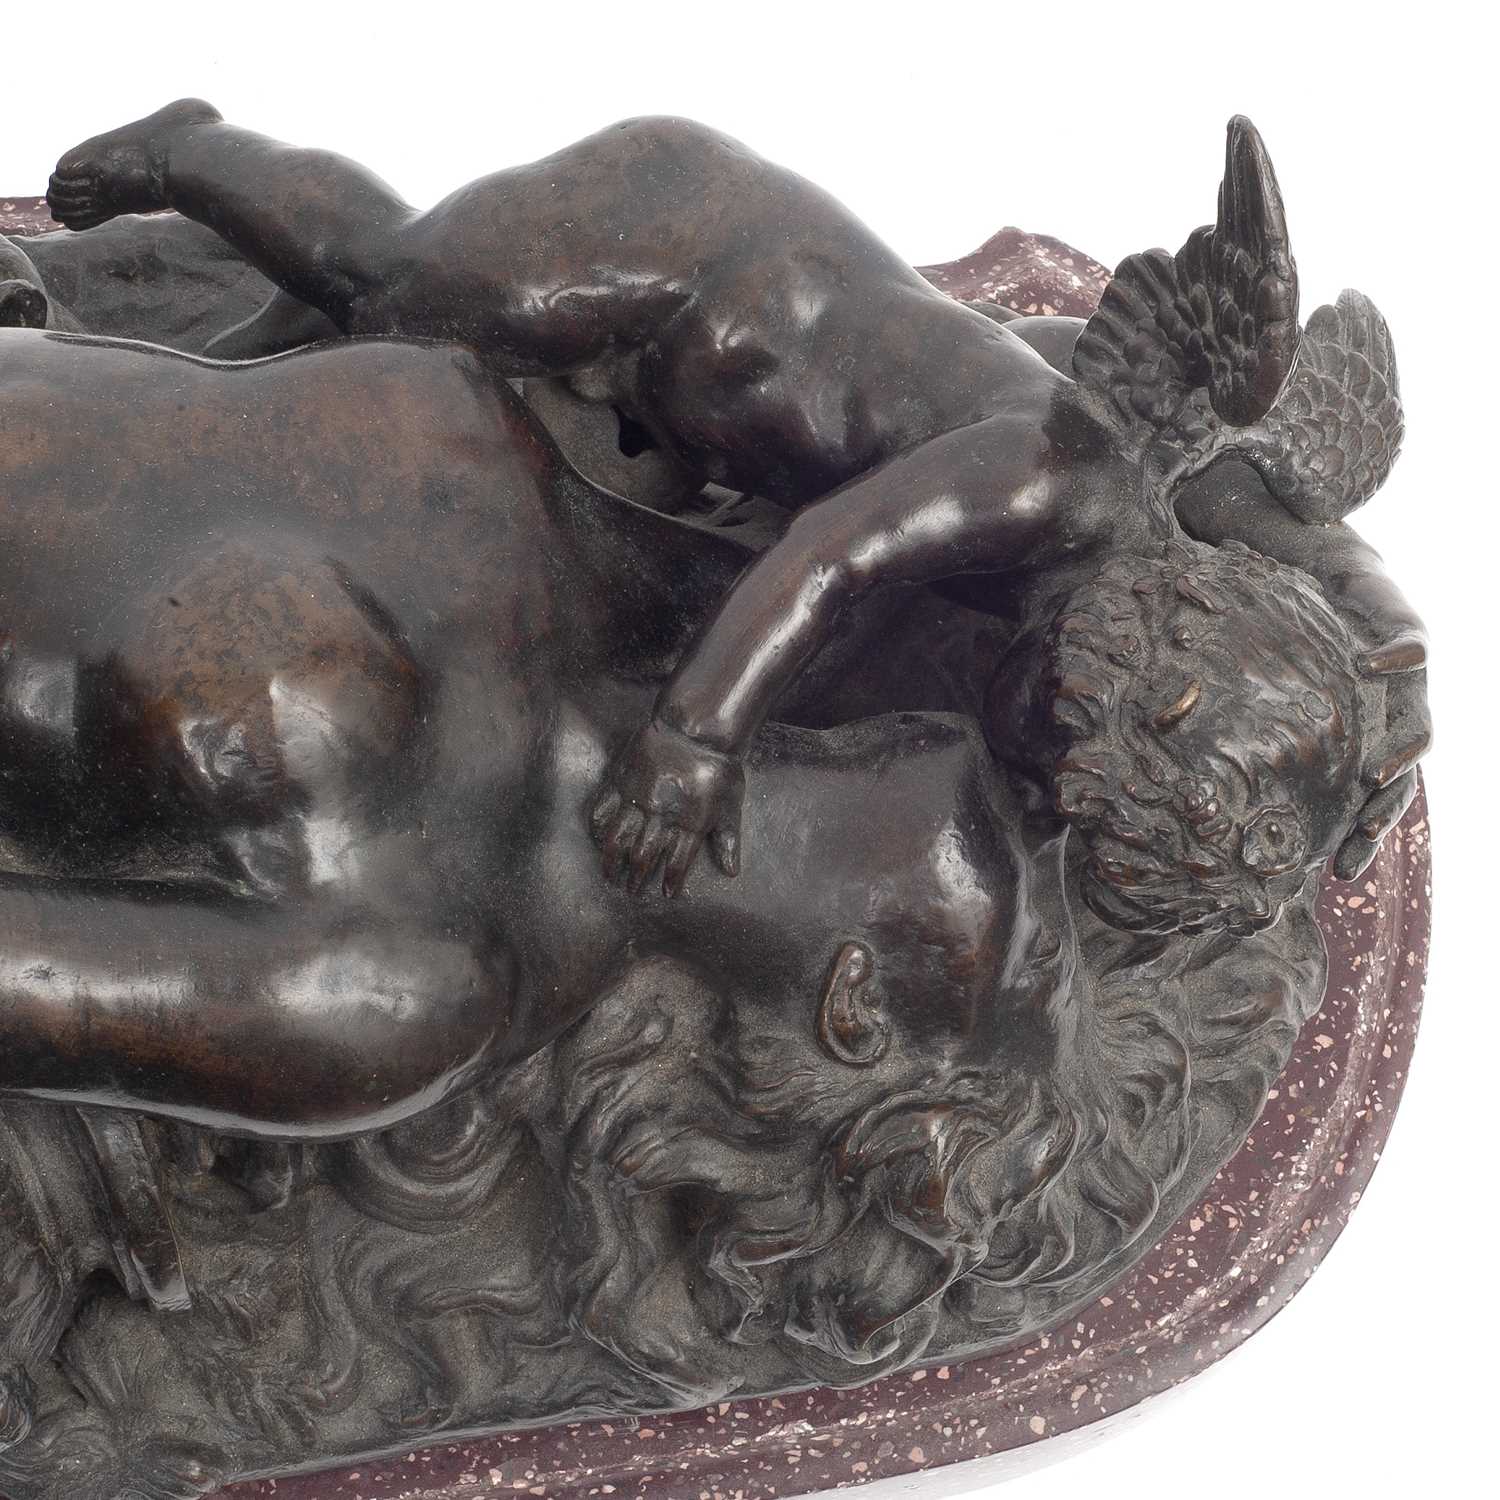 A LARGE 17TH CENTURY STYLE BRONZE EROTIC GROUP, PROBABLY 19TH CENTURY - Image 5 of 6